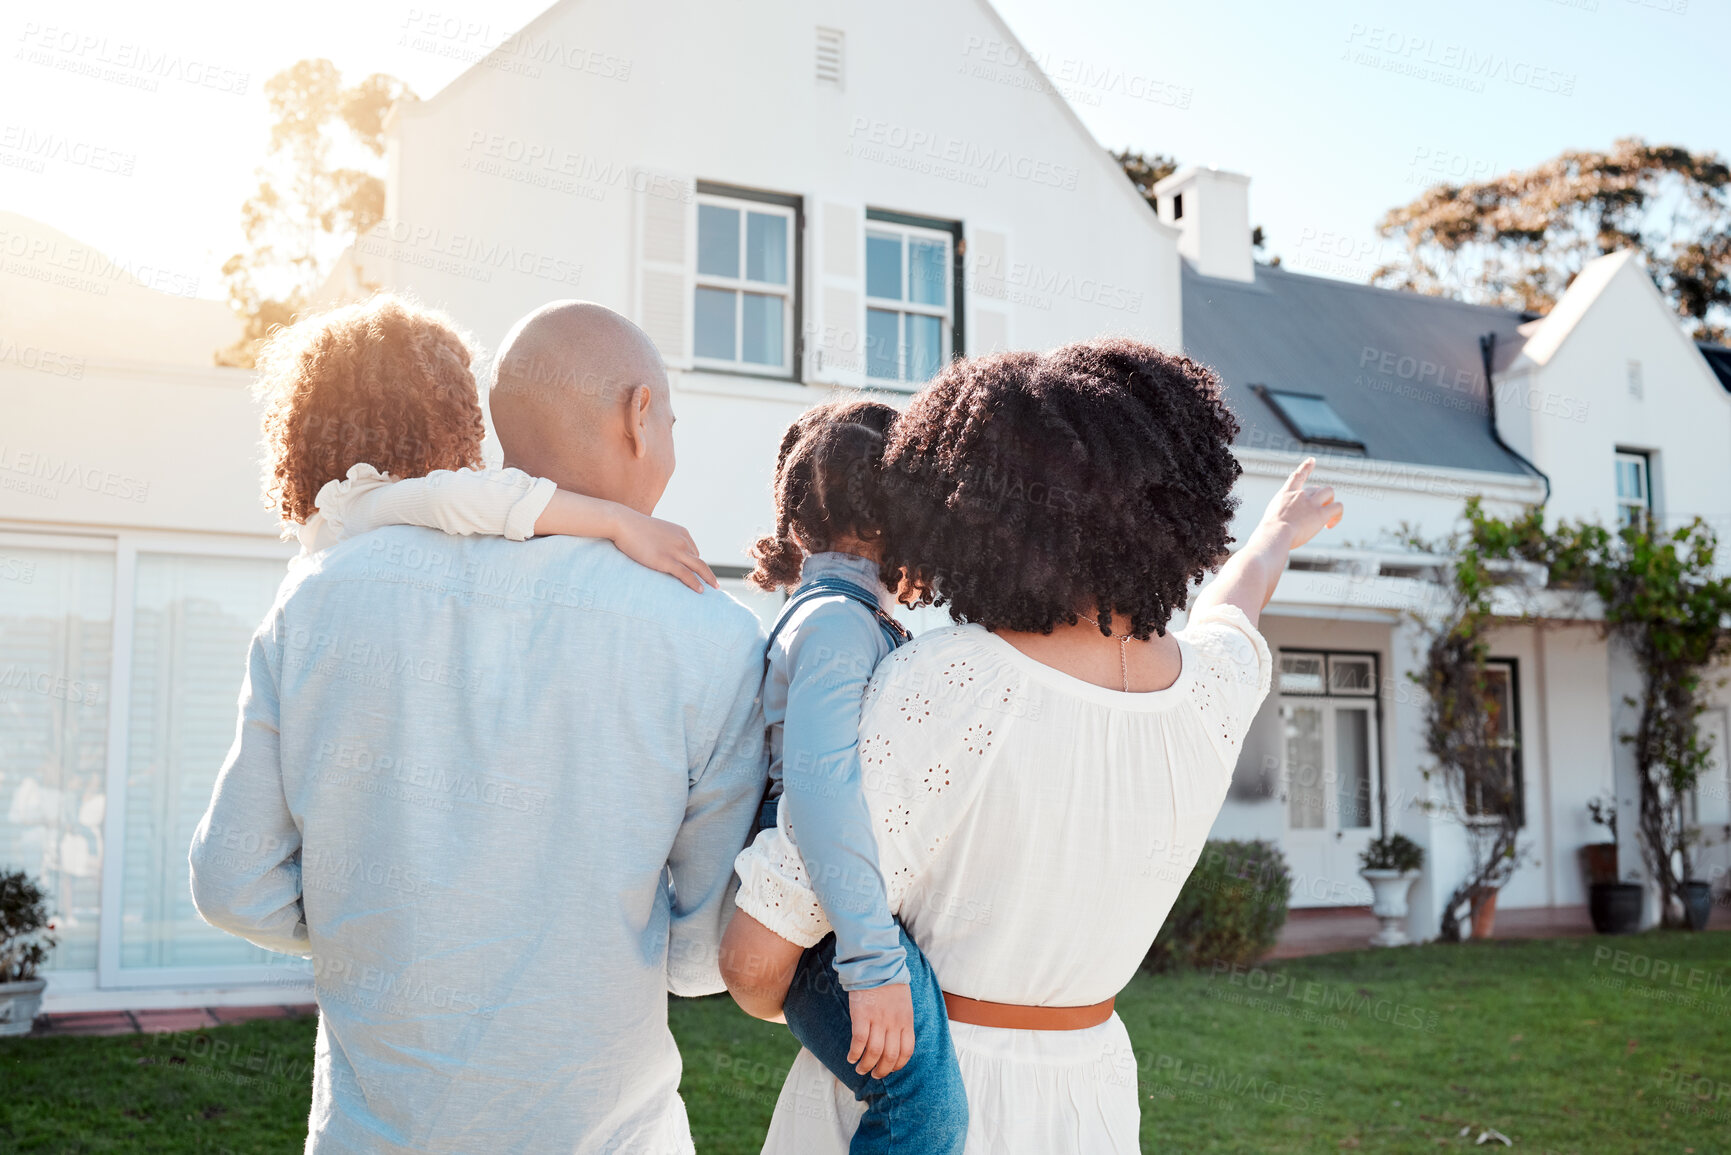 Buy stock photo Real estate, love and family in the yard of their new house bonding and spending quality time together. Mortgage, luxury property and back of young mom, dad and children standing by their modern home